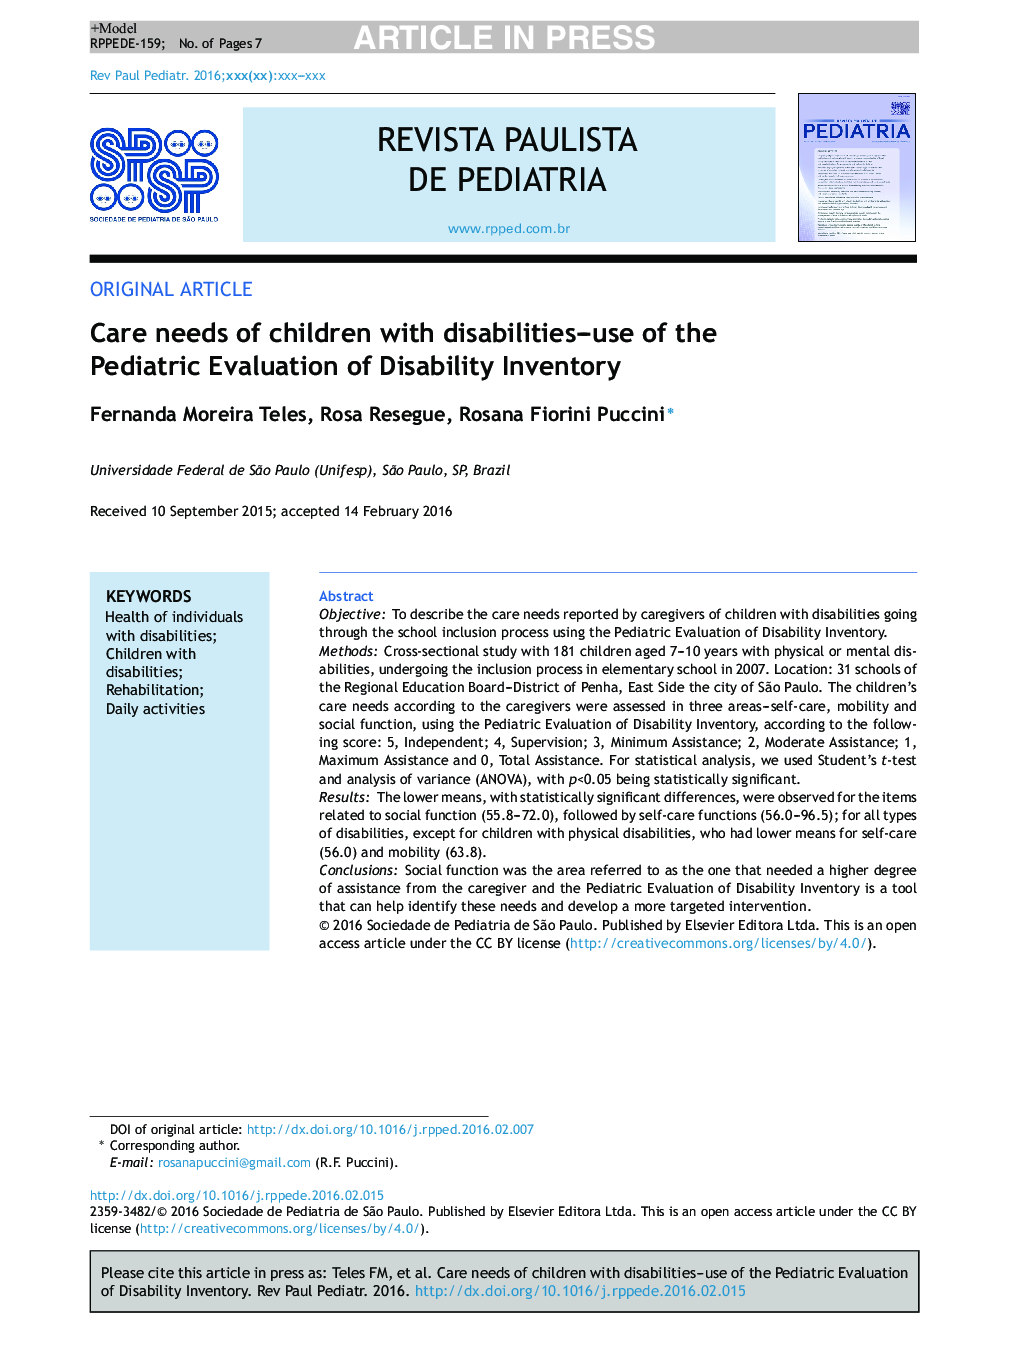 Care needs of children with disabilities - Use of the Pediatric Evaluation of Disability Inventory